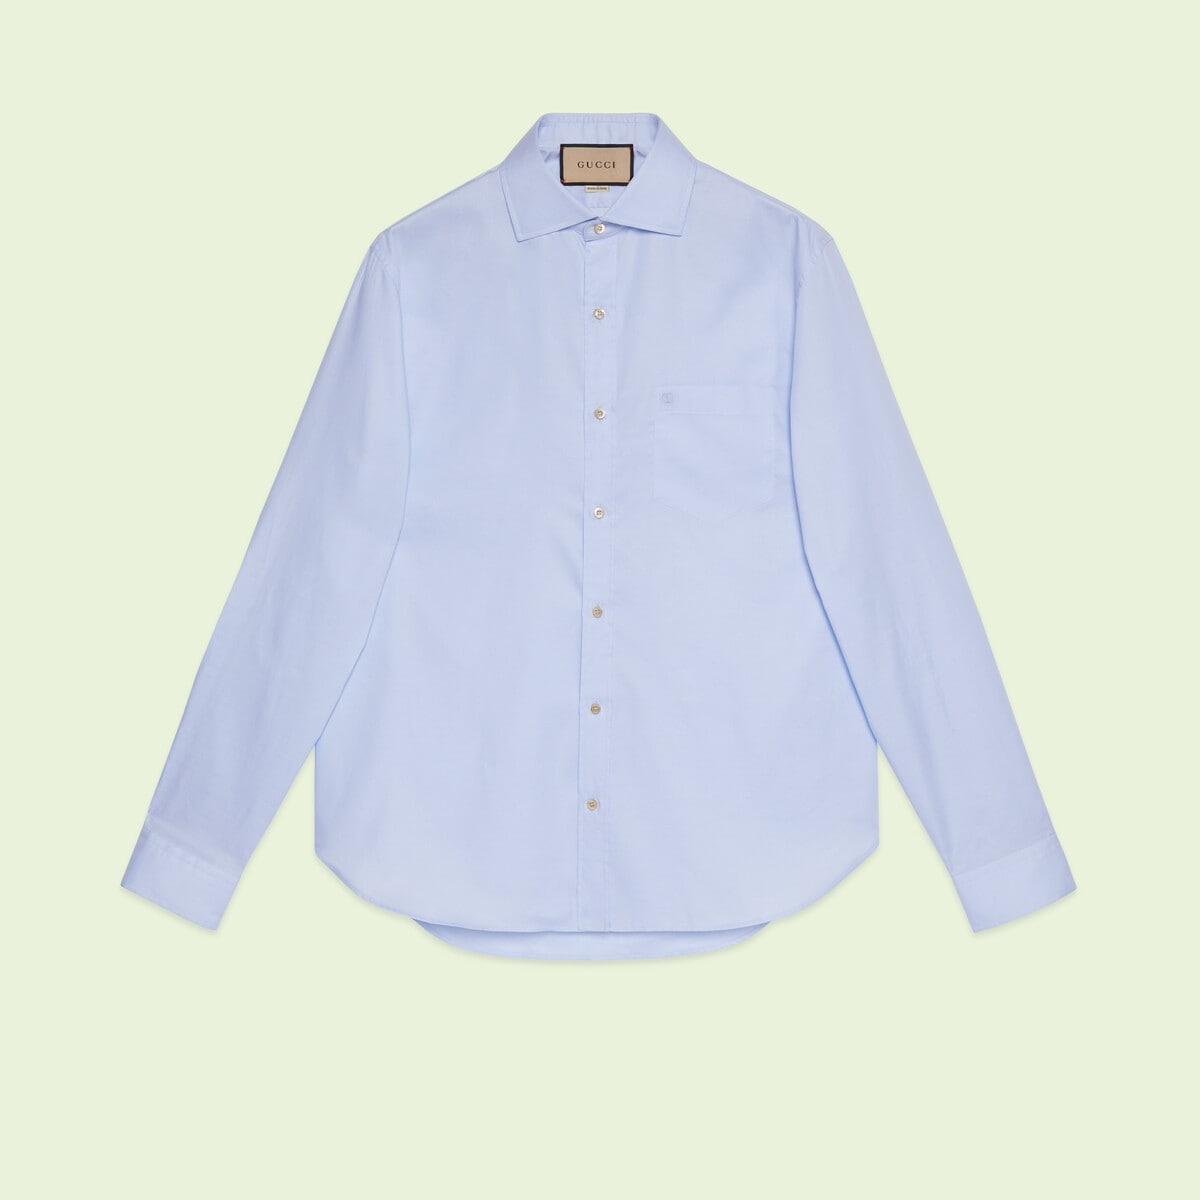 Cotton boxy shirt with Double G - 1